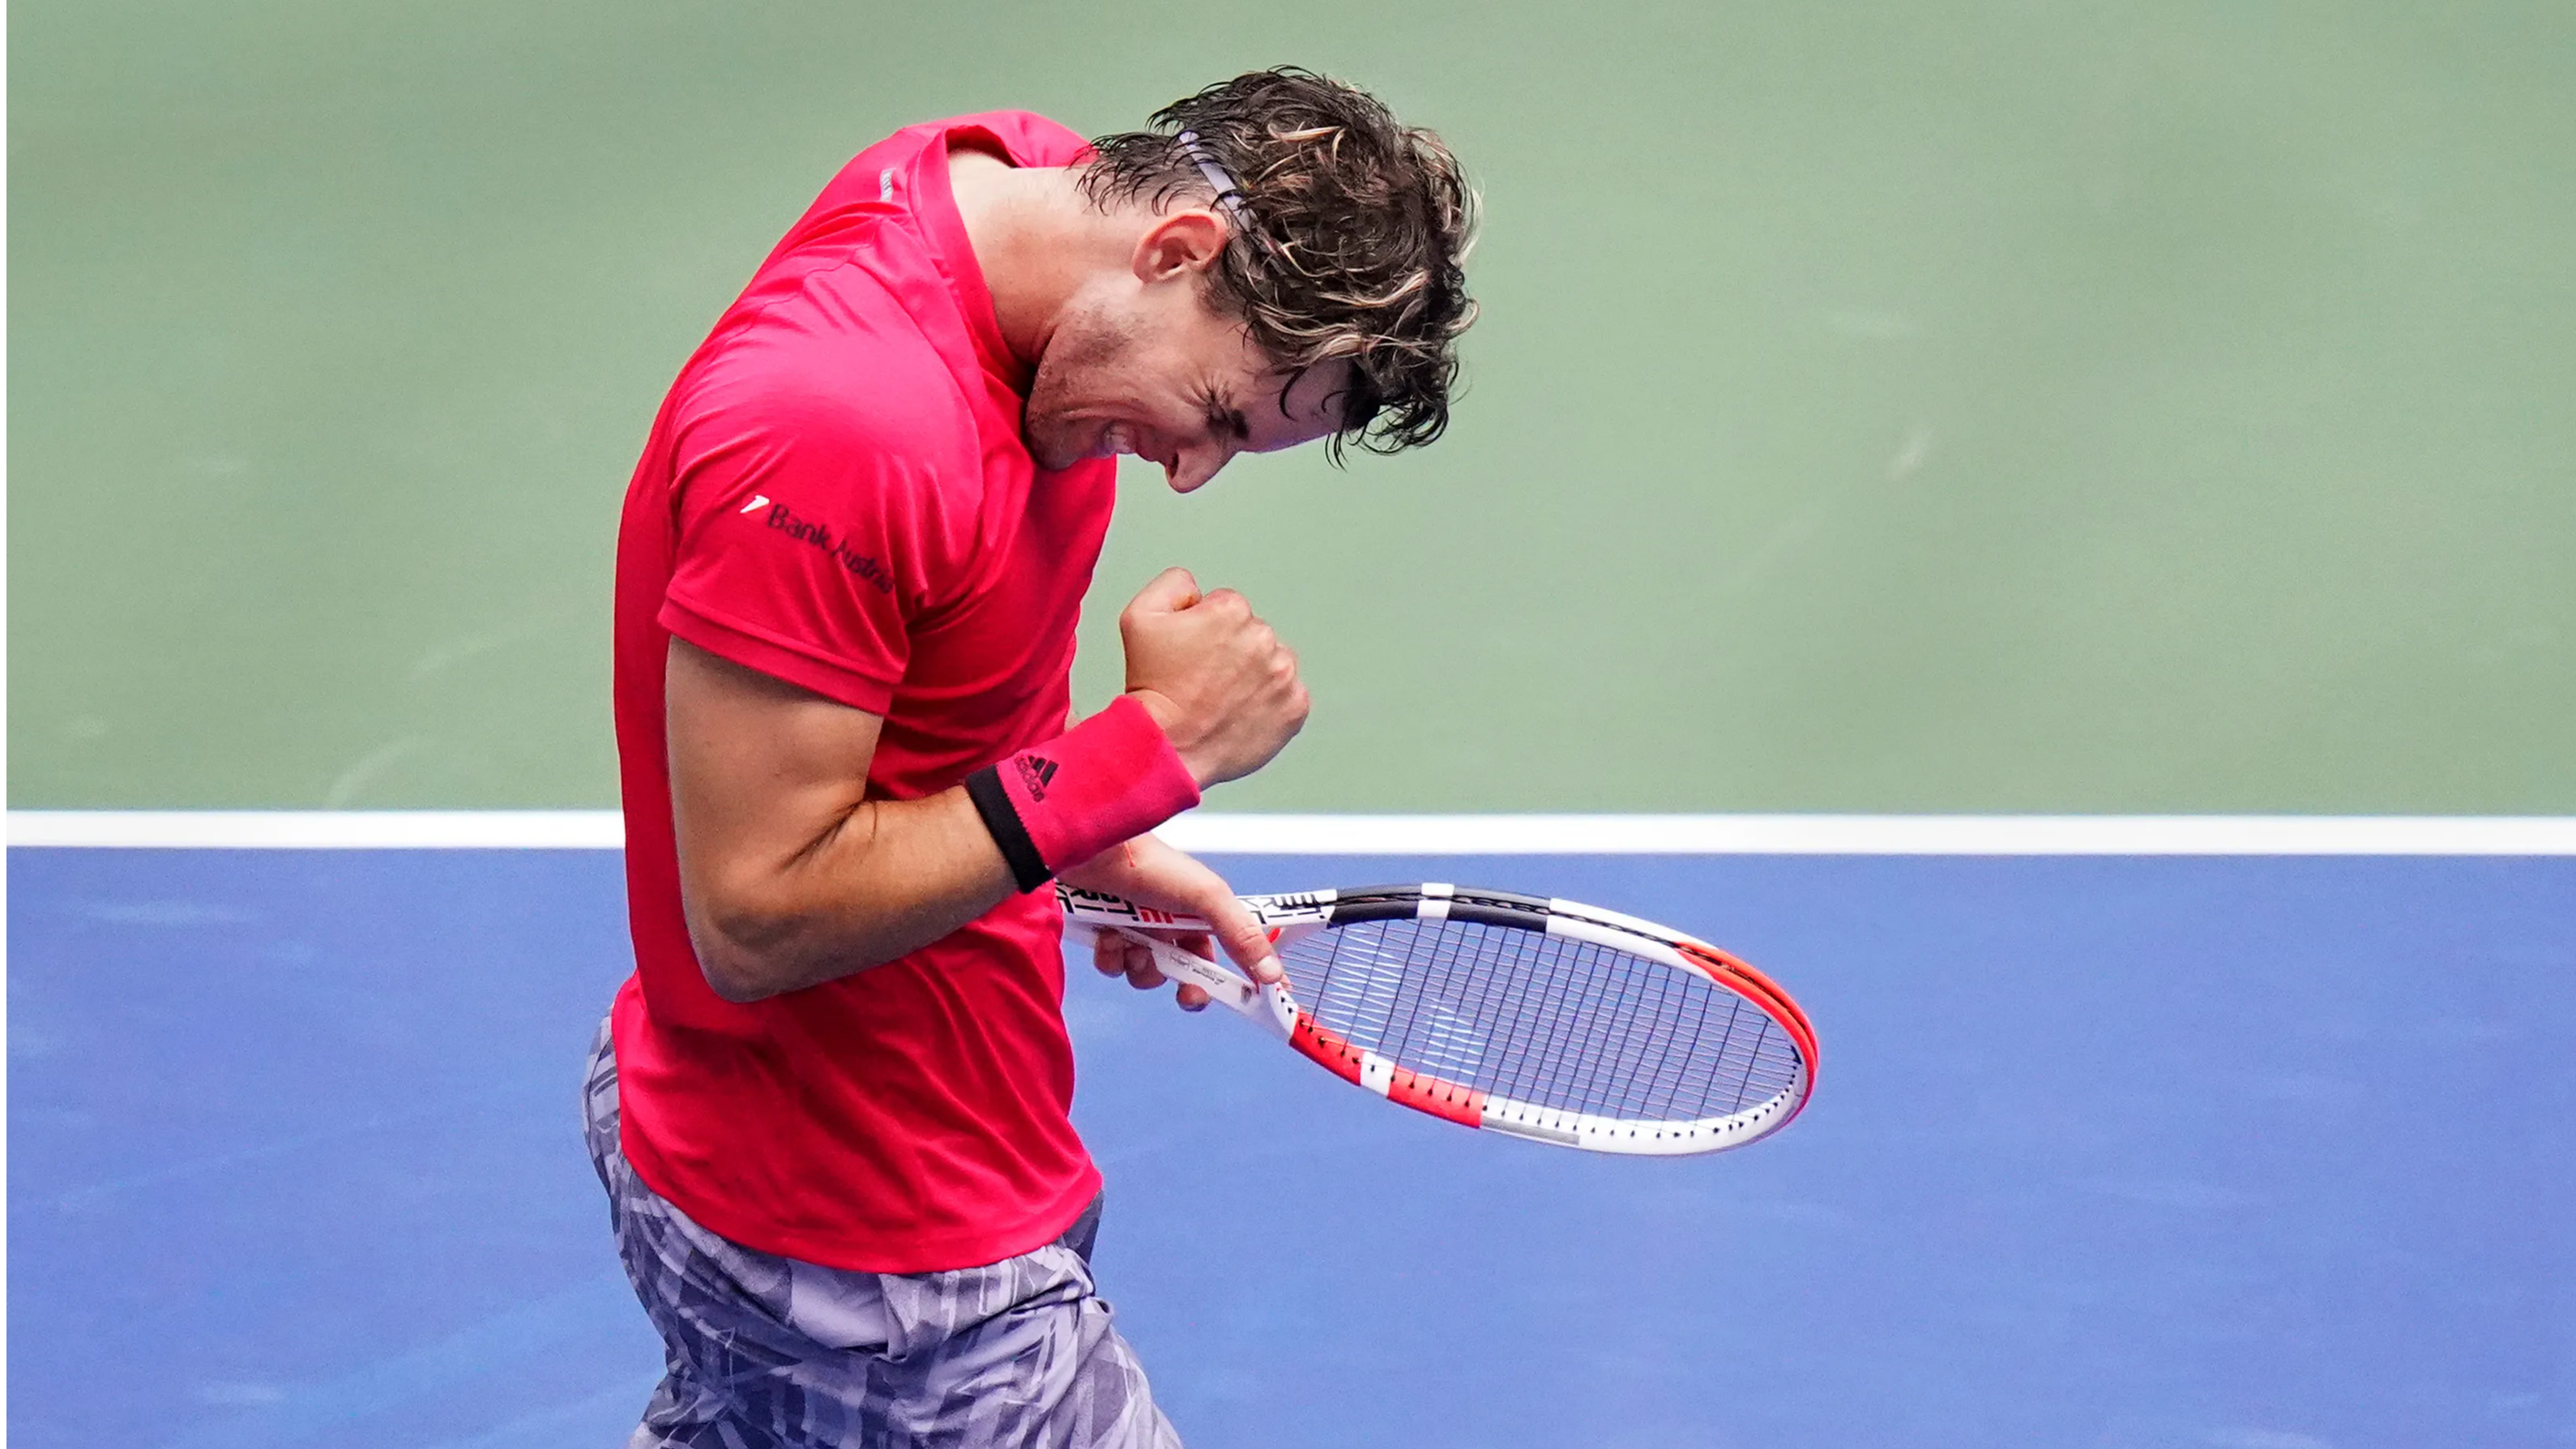 Dominic Thiem overcomes Daniil Medvedev to cruise into US Open finals